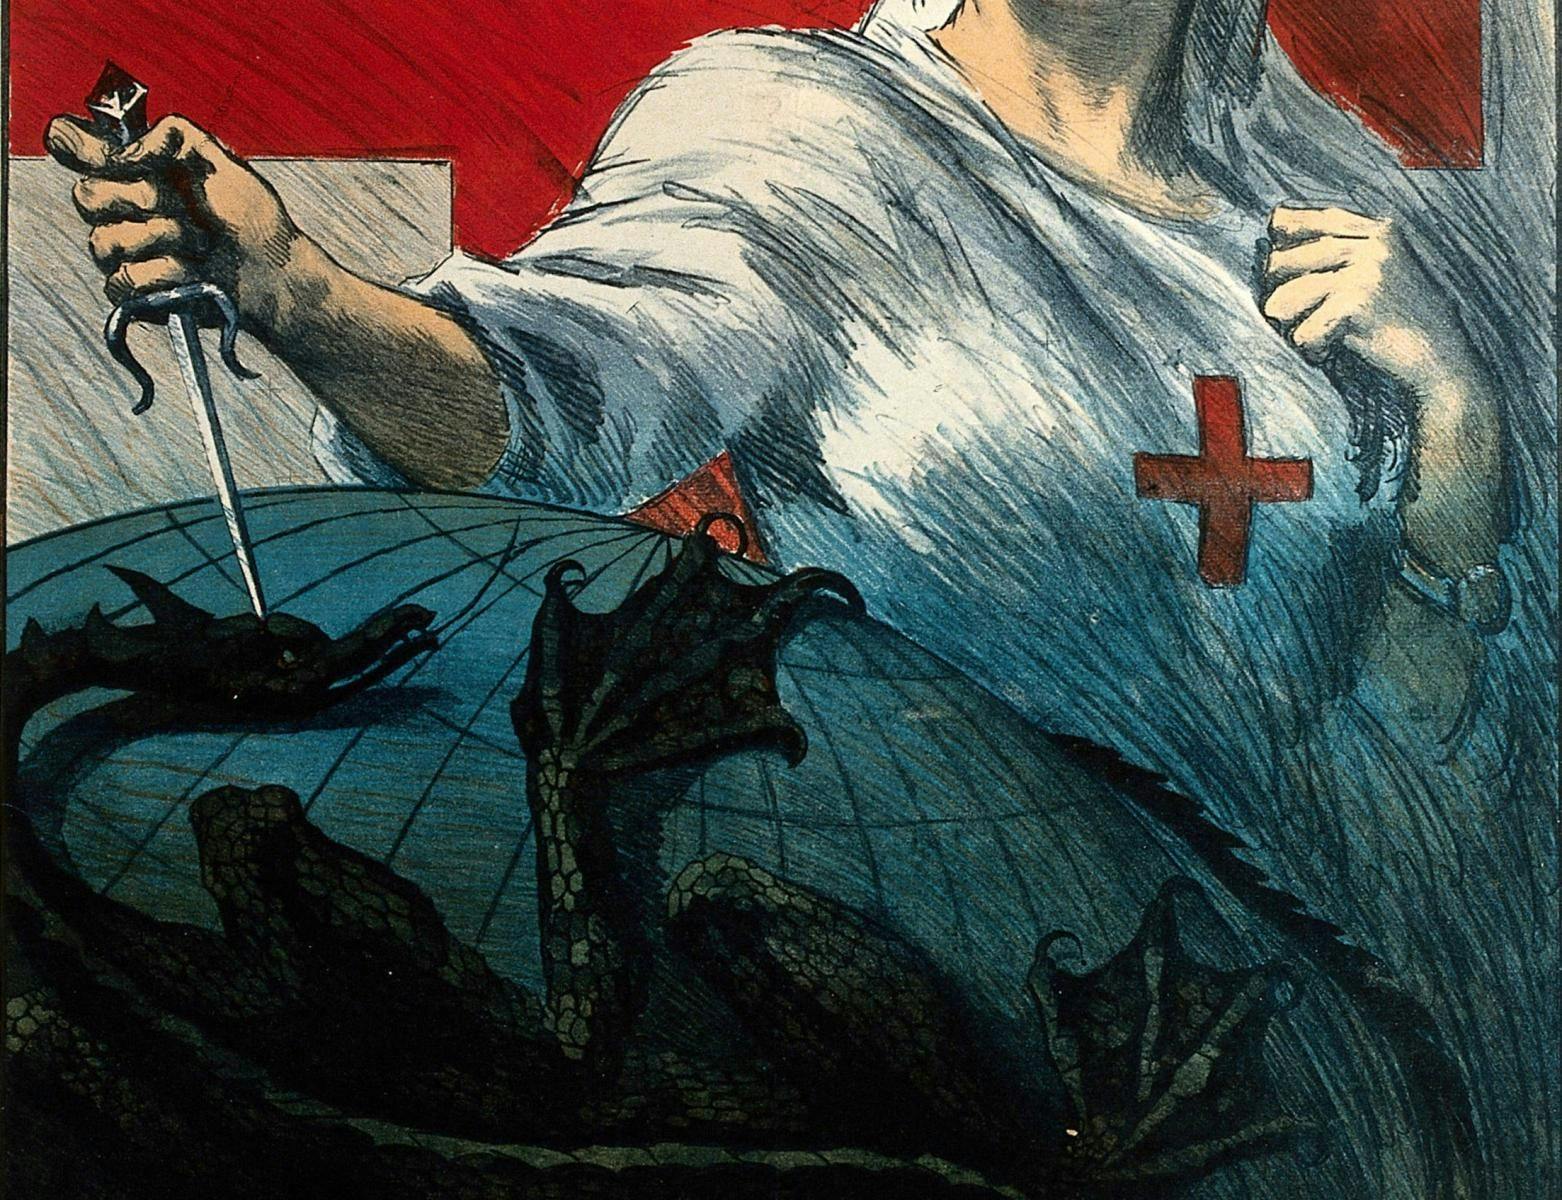 Dis-Ease still: A nurse stabbing a dragon holding the globe in its claws (Italian Red Cross tuberculosis appeal, c. 1920, Wellcome Collection)